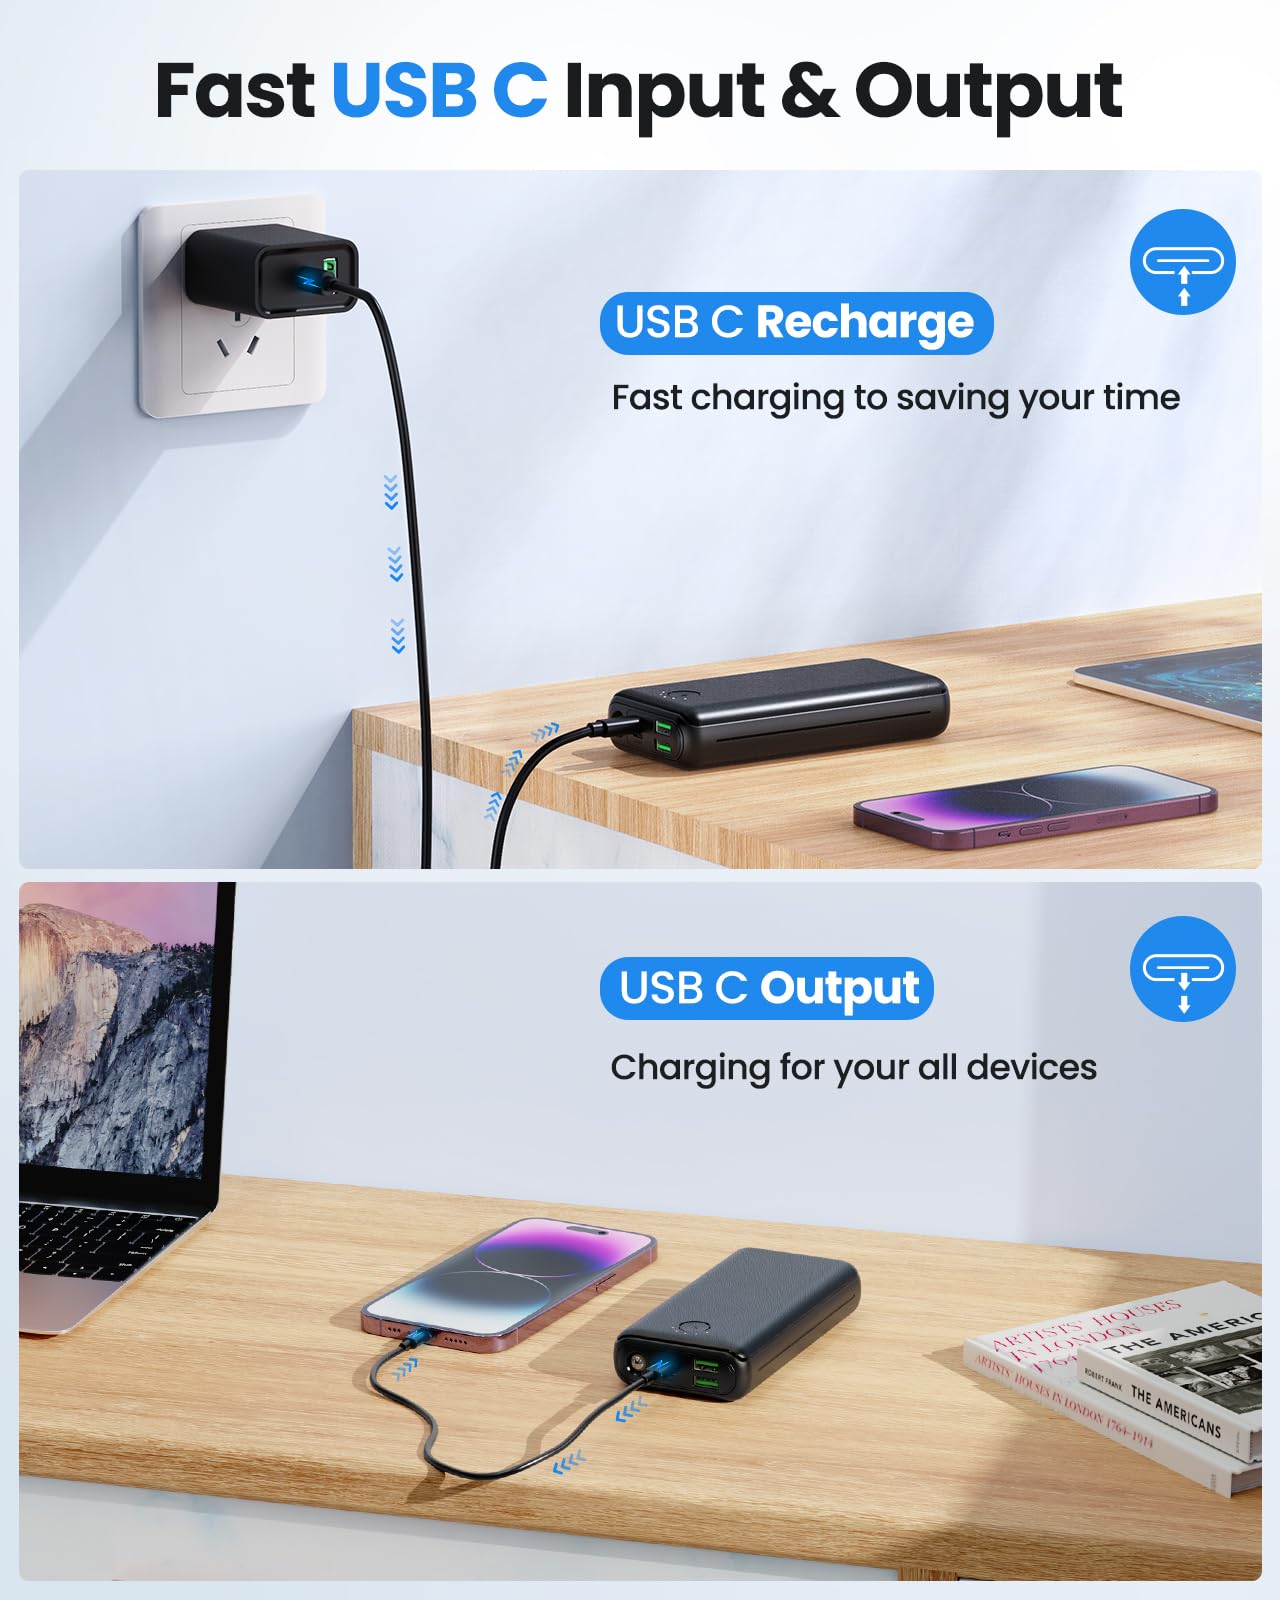 Portable Charger Power Bank 30000mAh - USB C 22.5W Fast Charging External Battery Pack Charging Bank PD QC4.0 with Flashlight 3 Outputs & 2 Inputs Phone Charger for iPhone Samsung Galaxy iPad etc